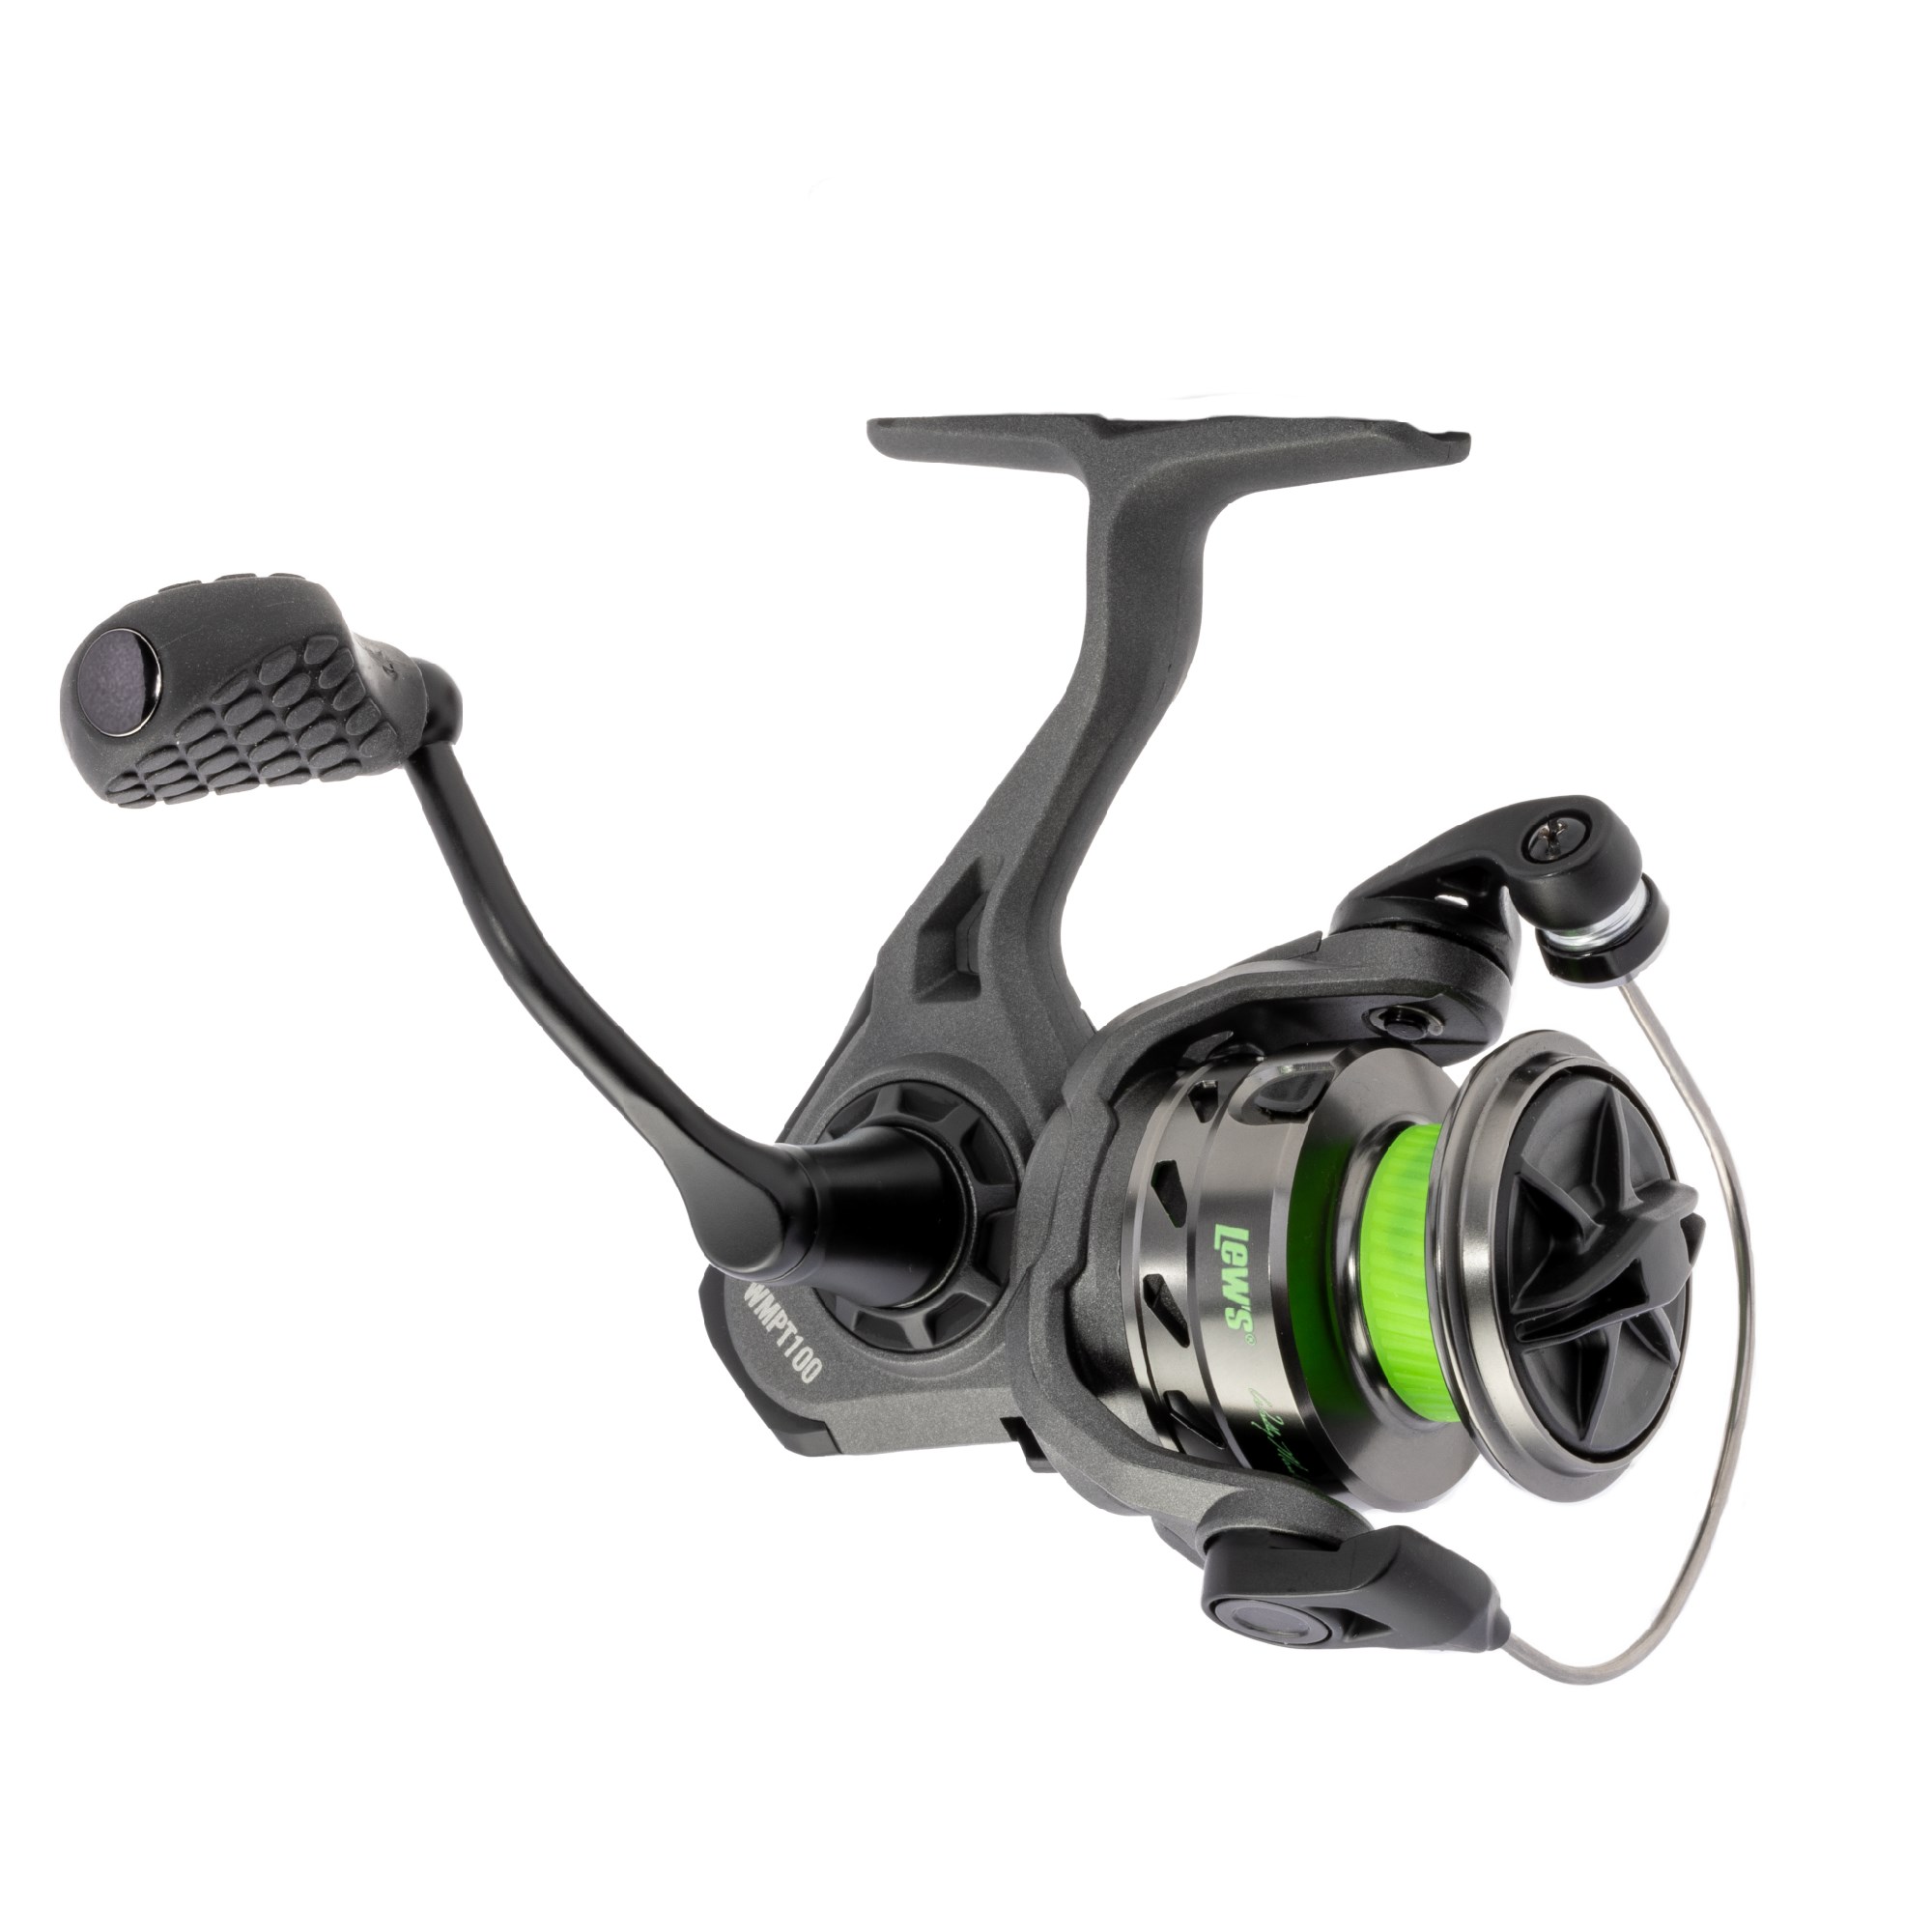 https://cs1.0ps.us/original/opplanet-mr-crappie-wally-marshall-pro-target-spin-reel-100-size-wmpt100-m